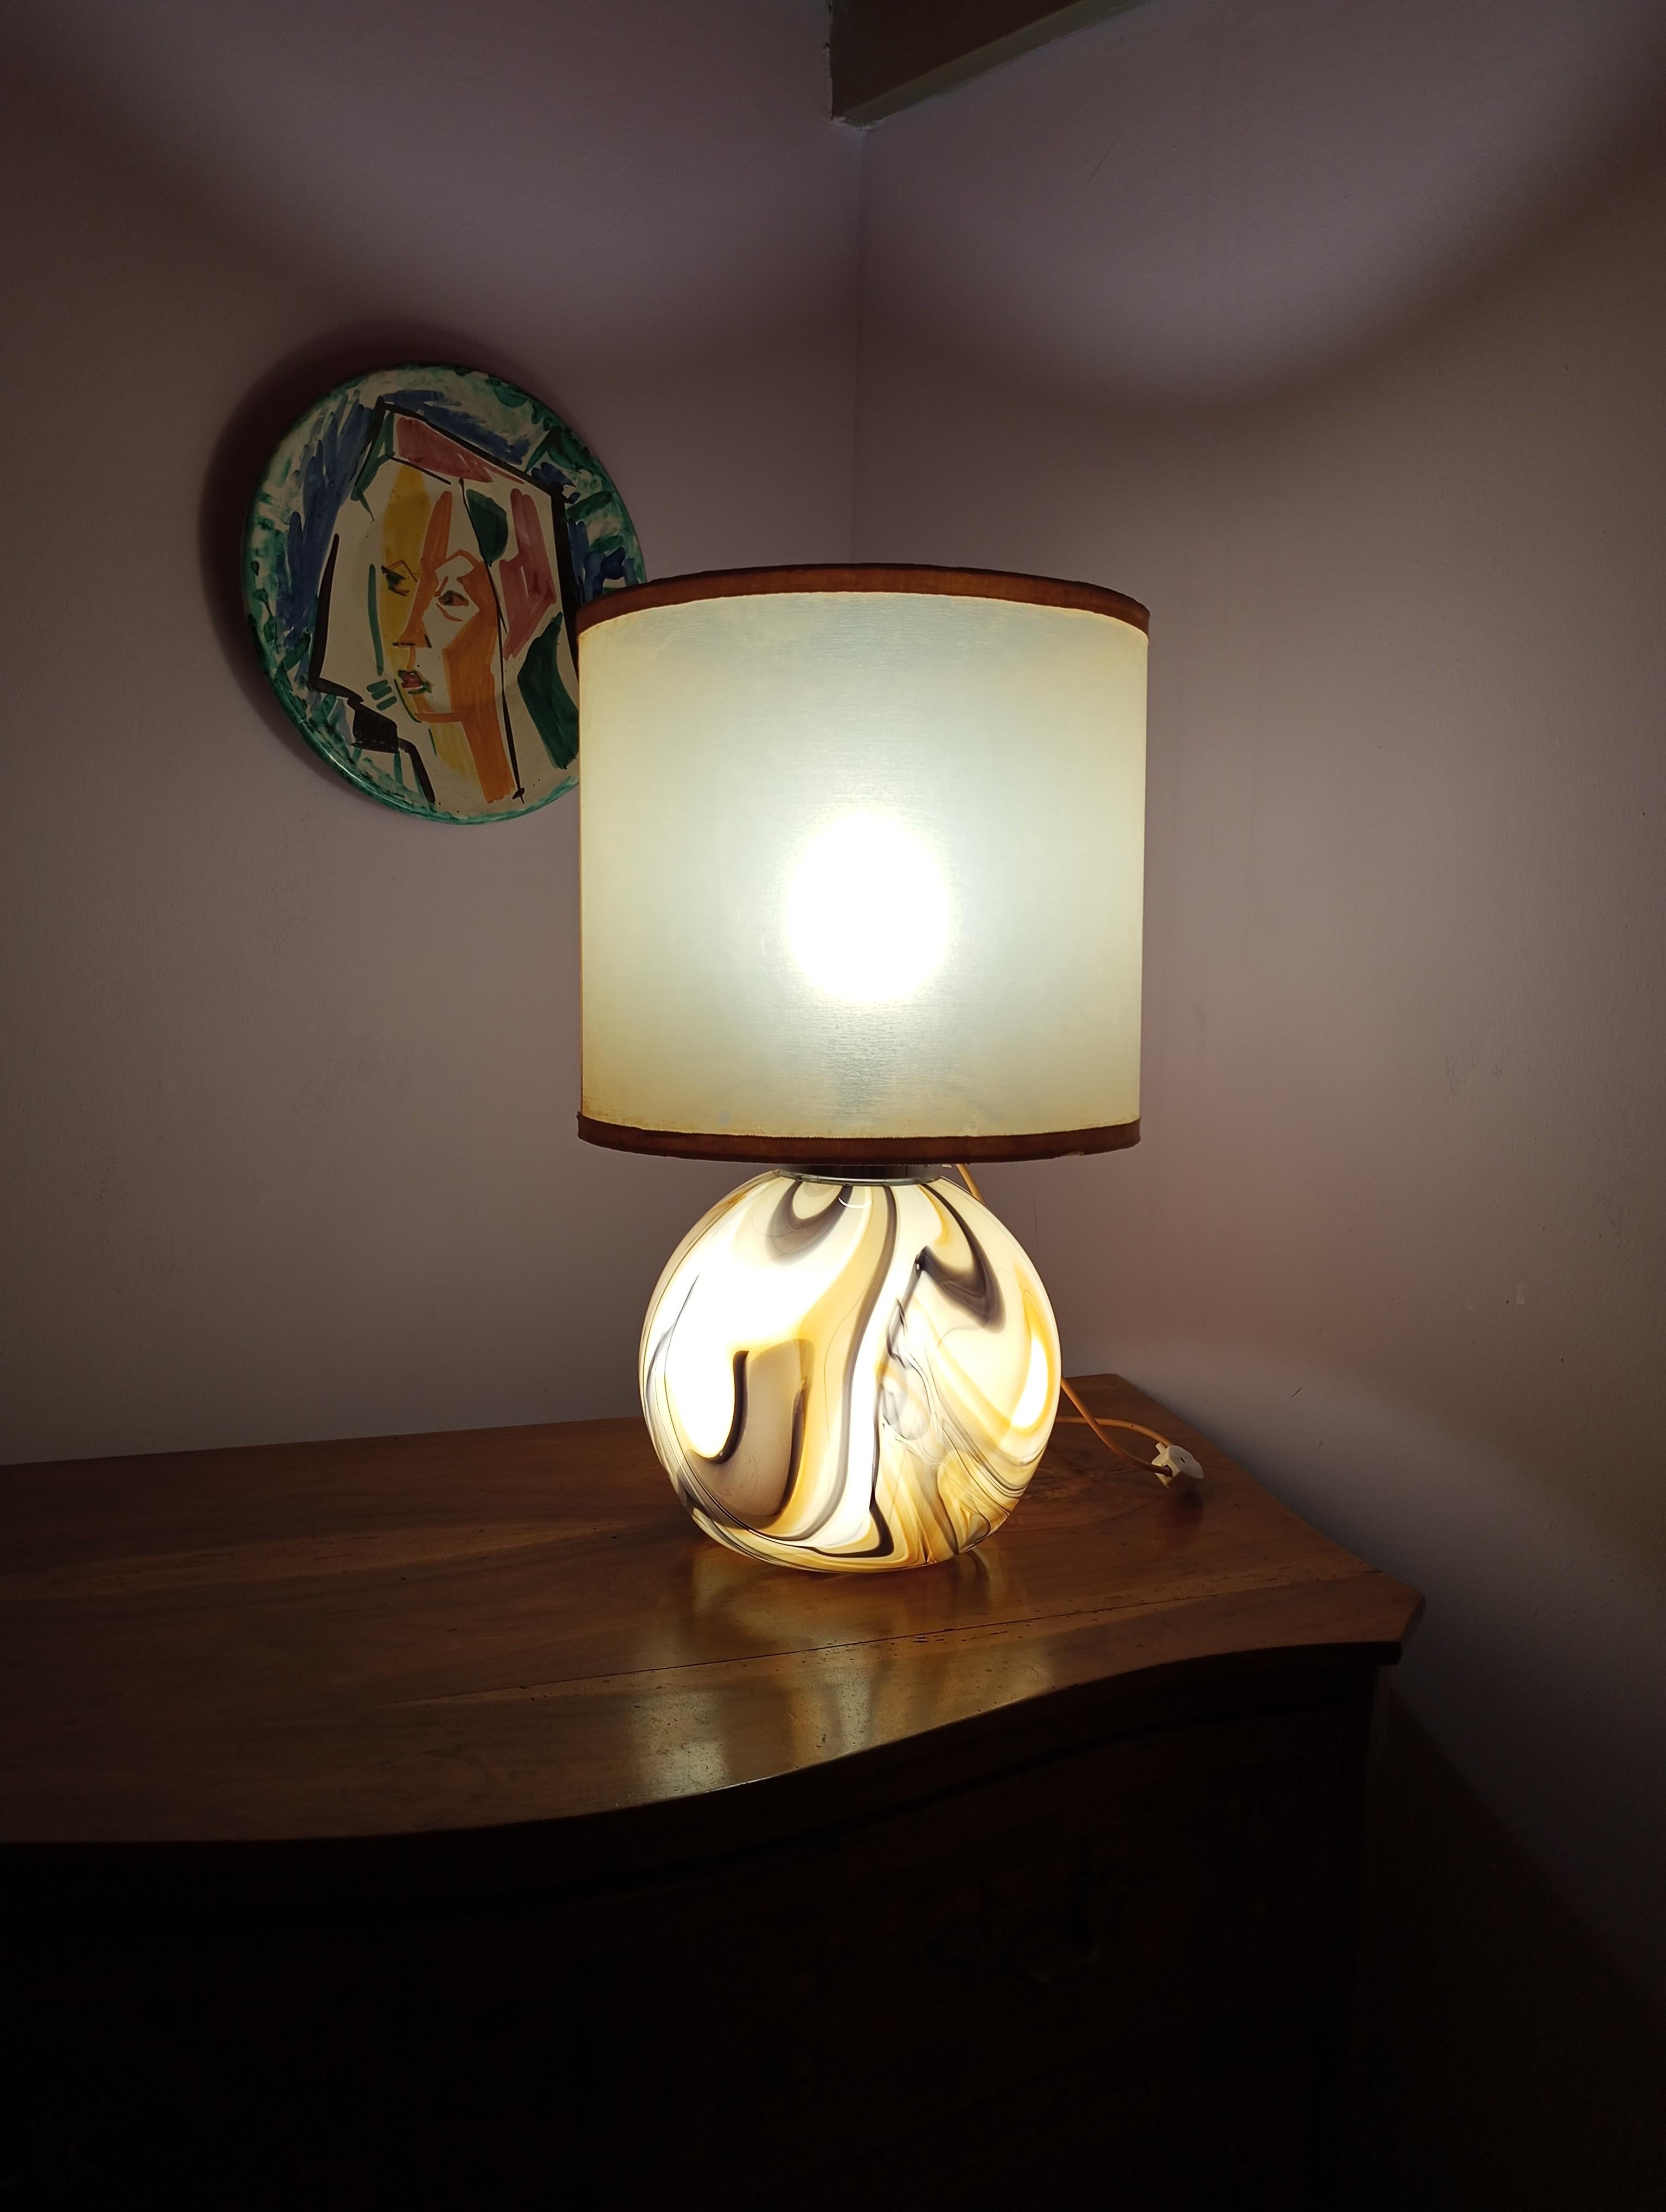  Italian table lamp with a spherical Murano glass base from the '70s. The glass is crafted with brown marble-like shades. The switch has three different positions, allowing you to independently turn on the two bulbs or both together. Lampshade